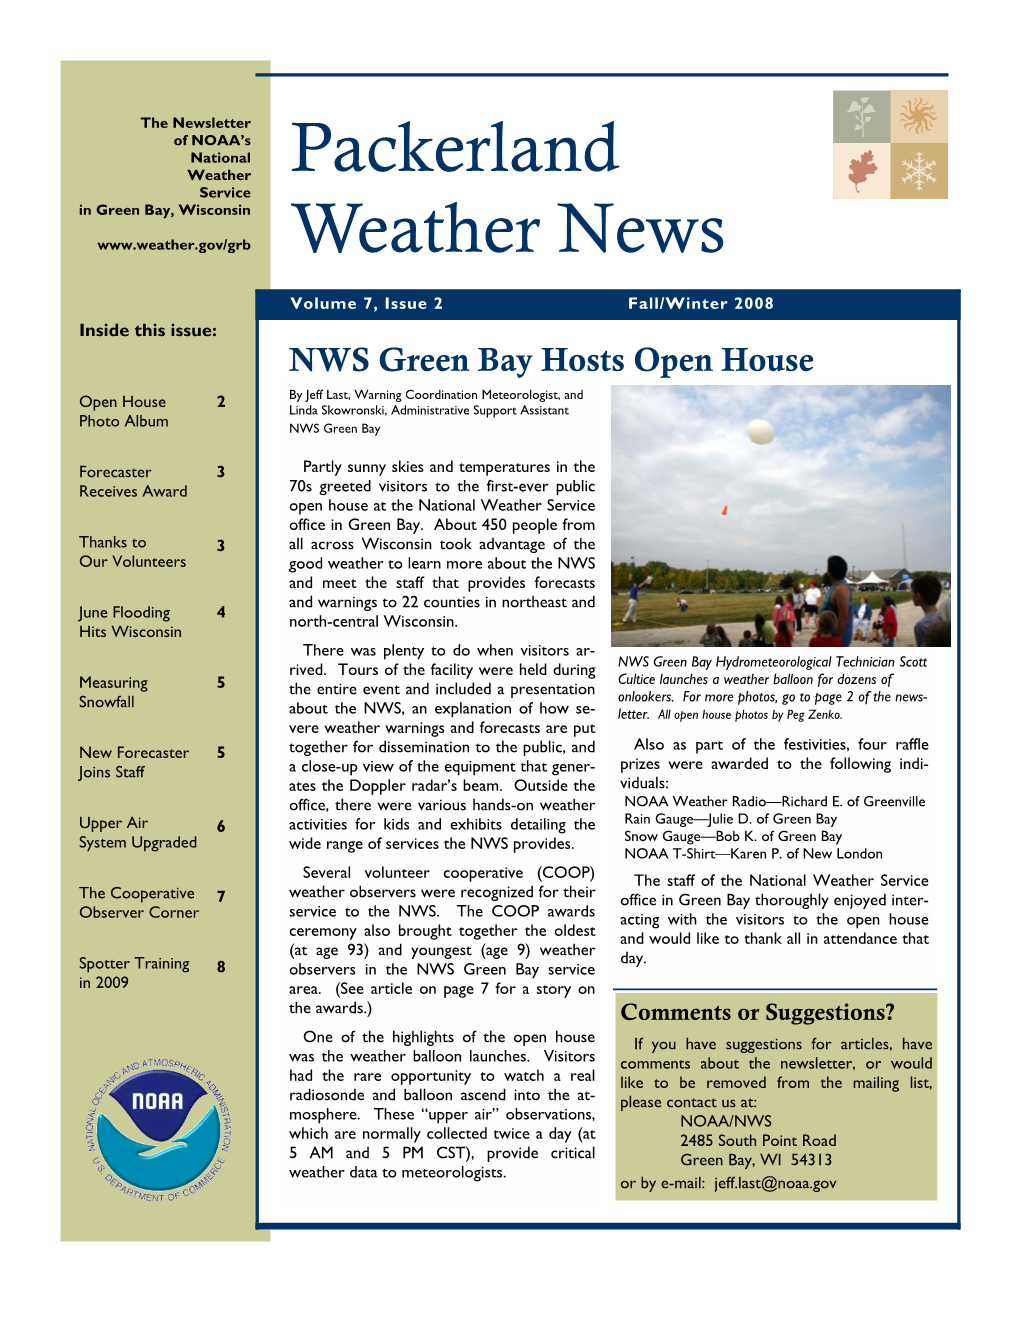 Packerland Weather News of NOAA’S National Weather Service in Green Bay, Wisconsin